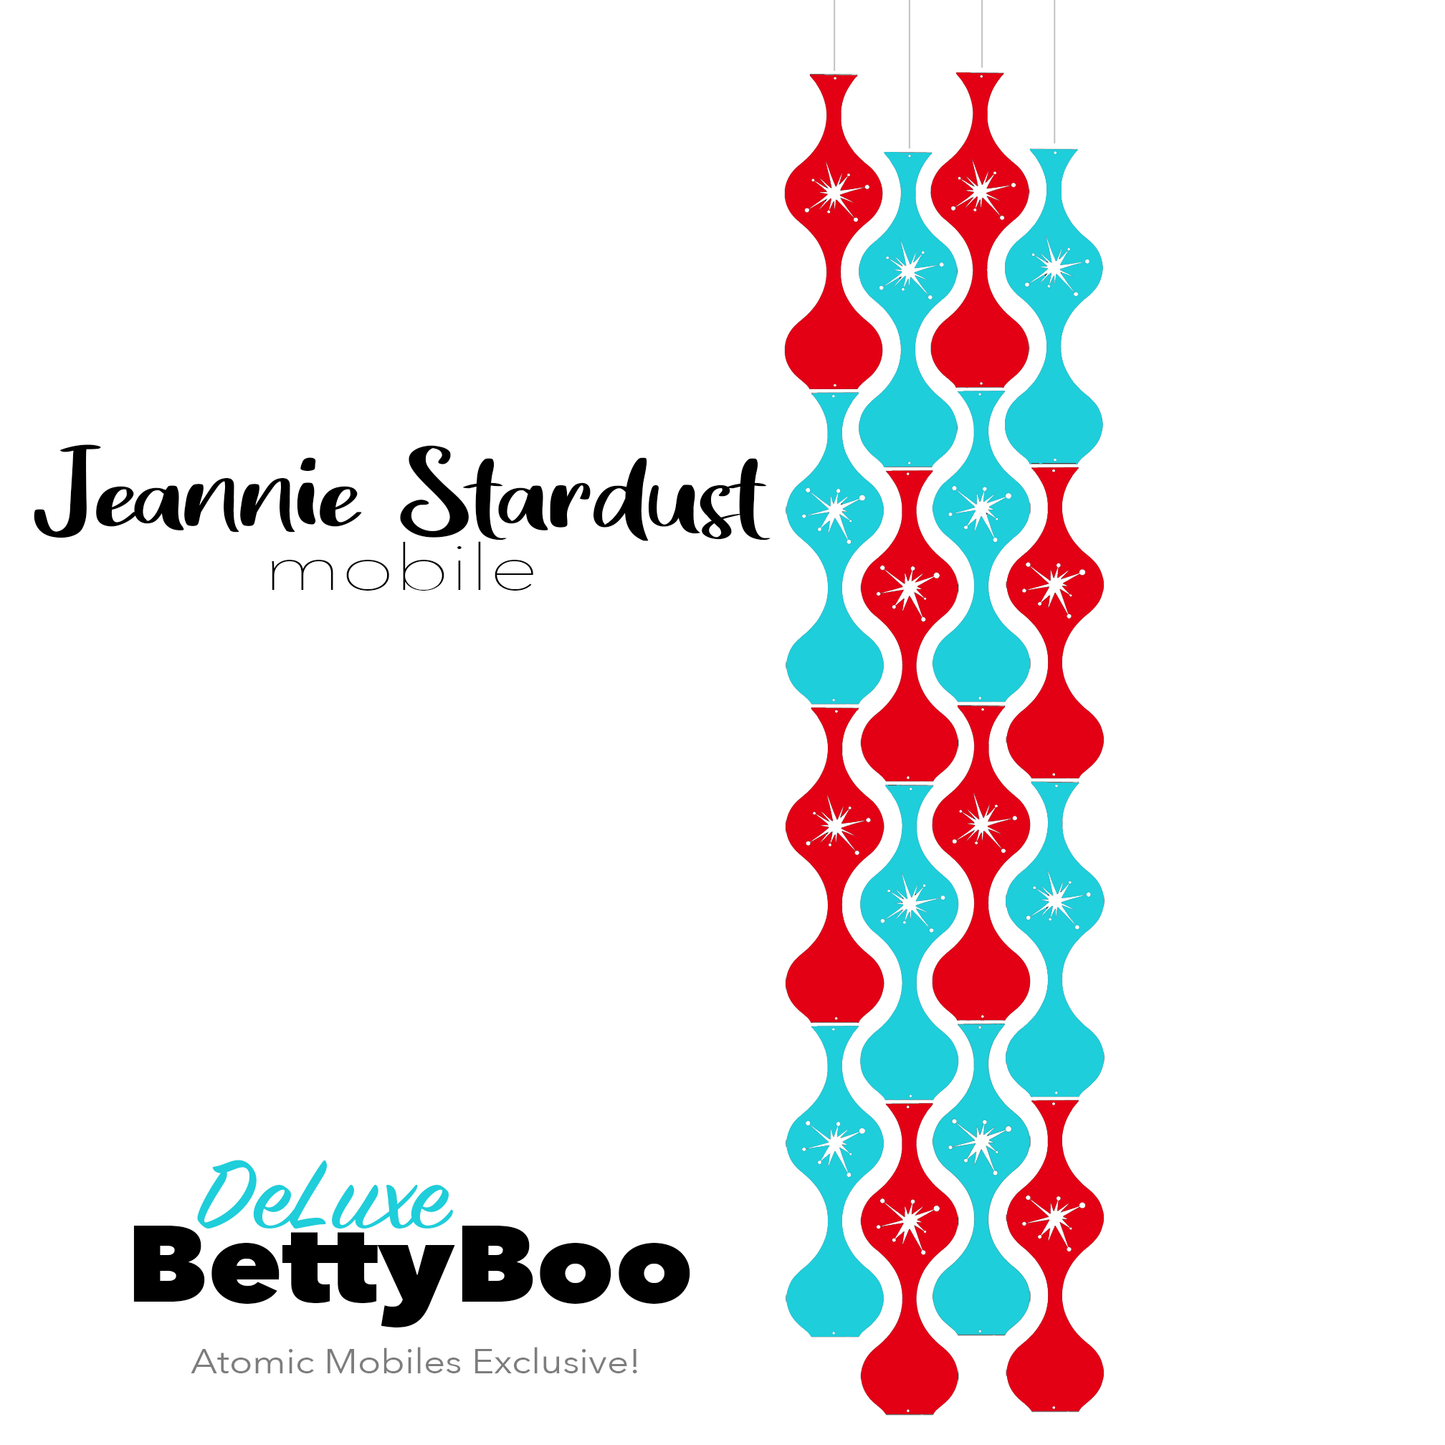 Deluxe BettyBoo Jeannie Stardust Hanging Art Mobile - mid century modern home decor in Red and Aqua - by AtomicMobiles.com